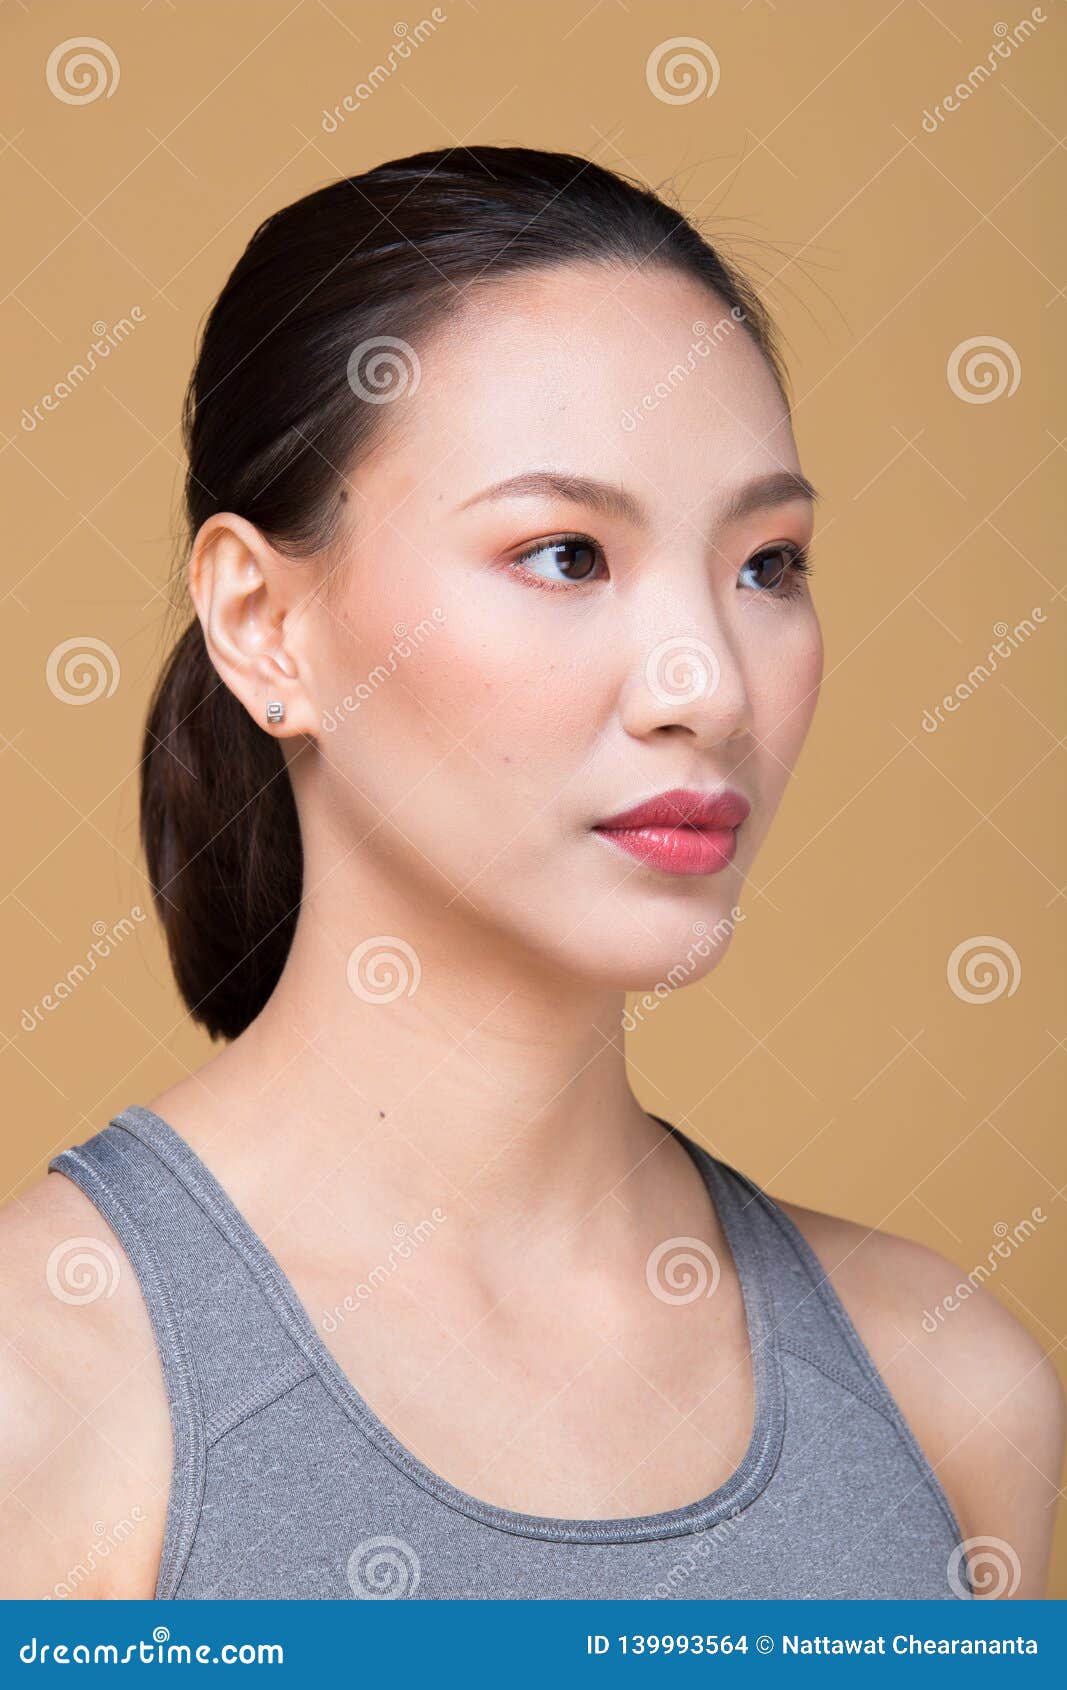 Asian Woman after Applying Make Up Hair Style Stock Photo - Image of ...